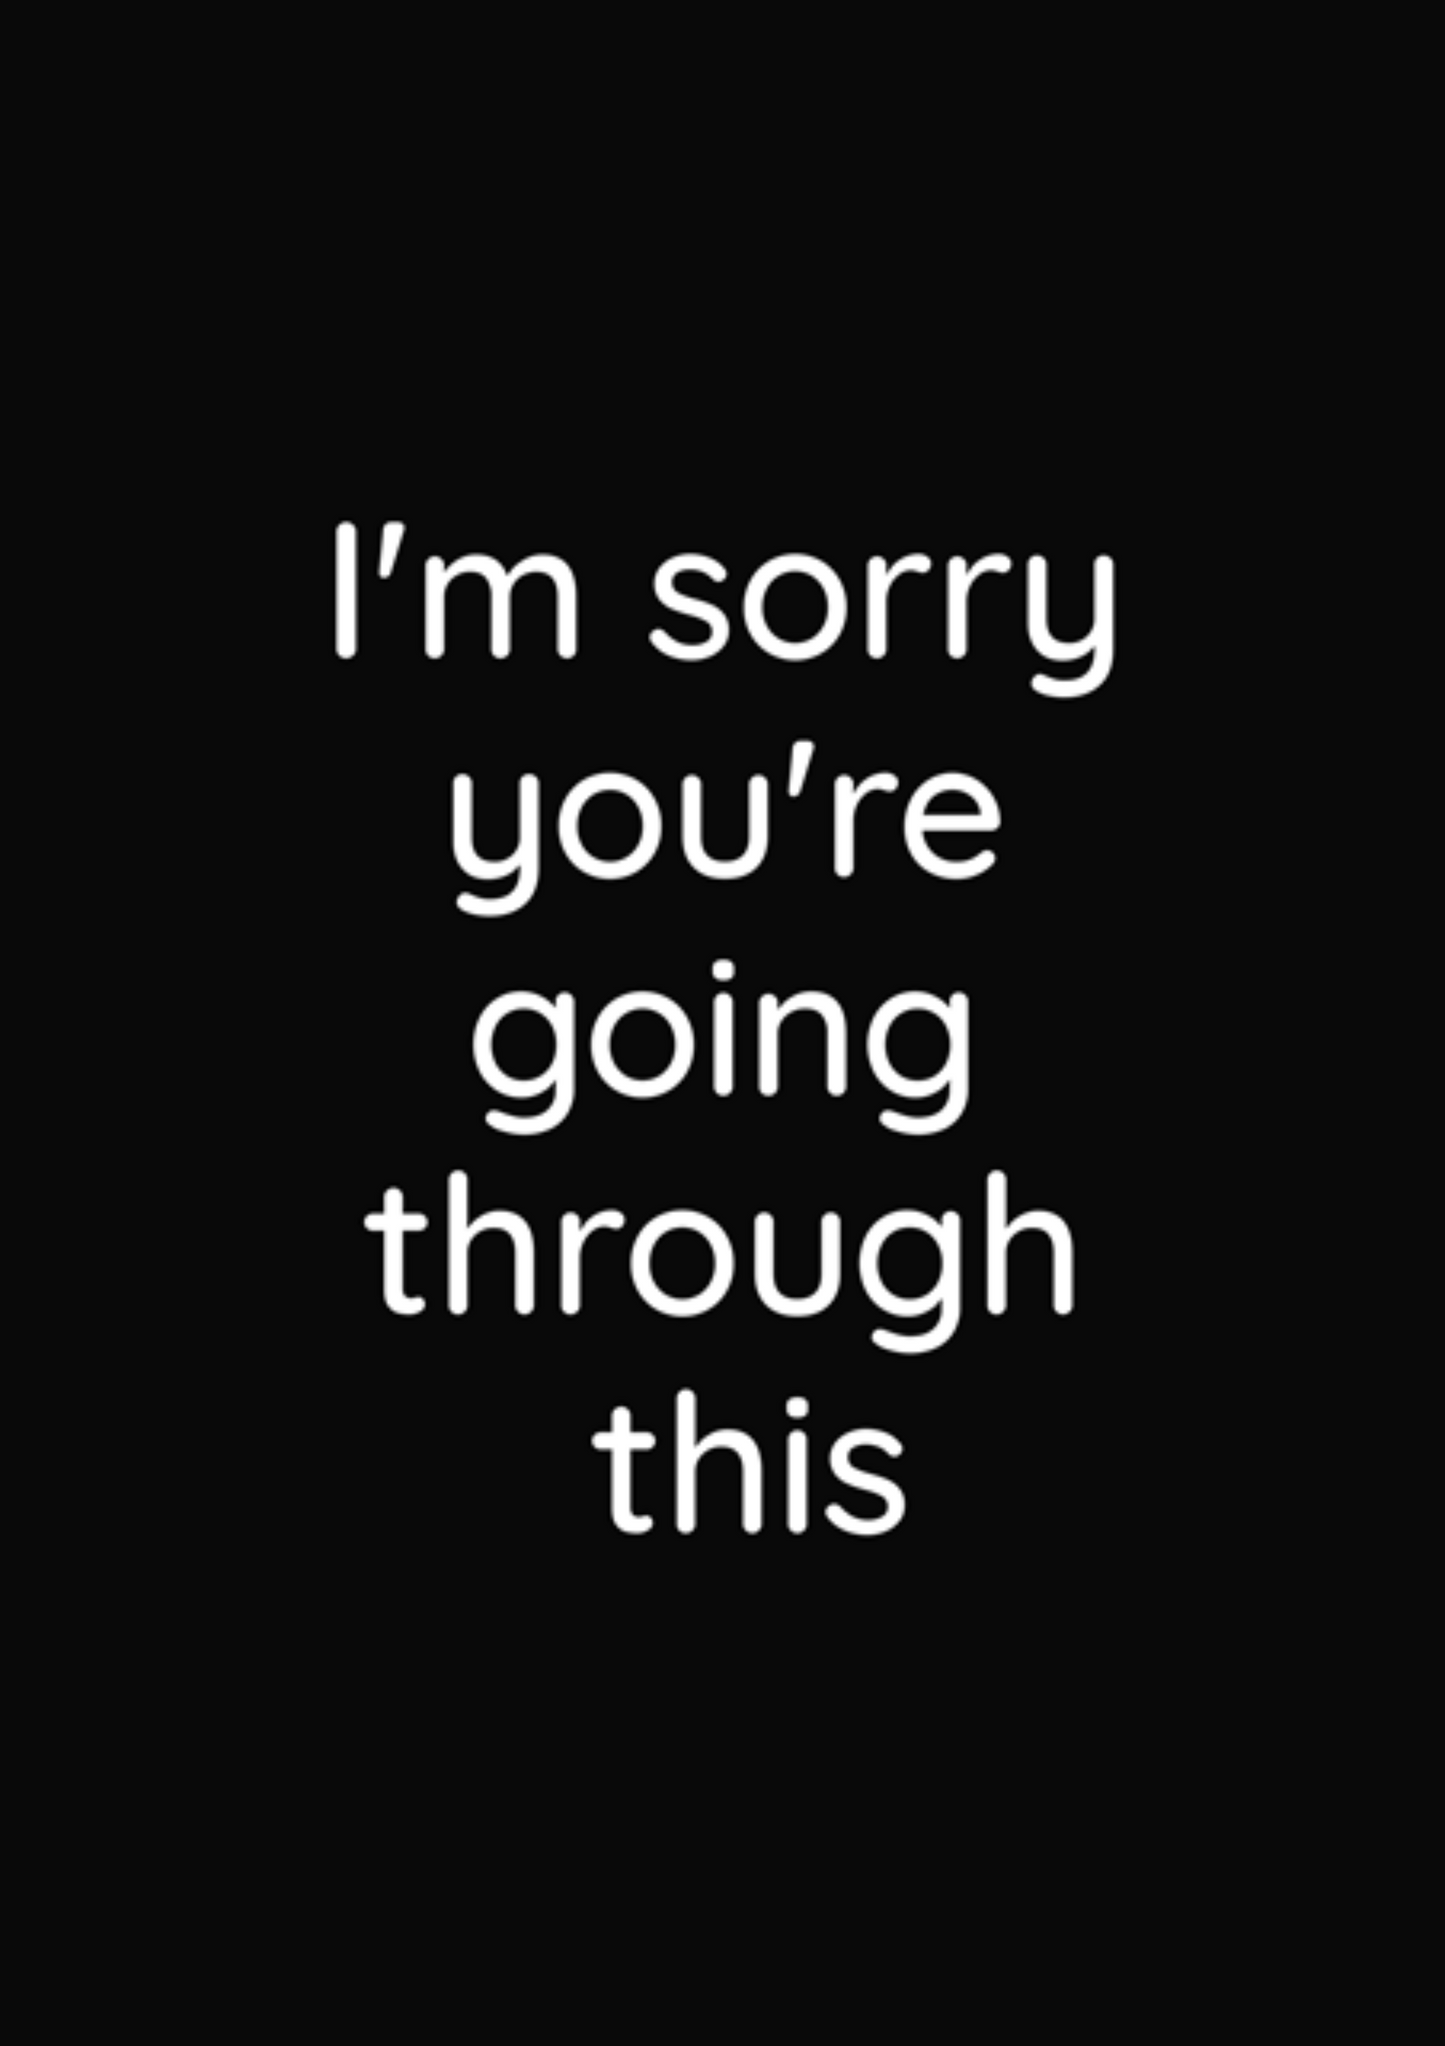 I Am Sorry You Are Going Through This - Sympathy  Greeting Card.